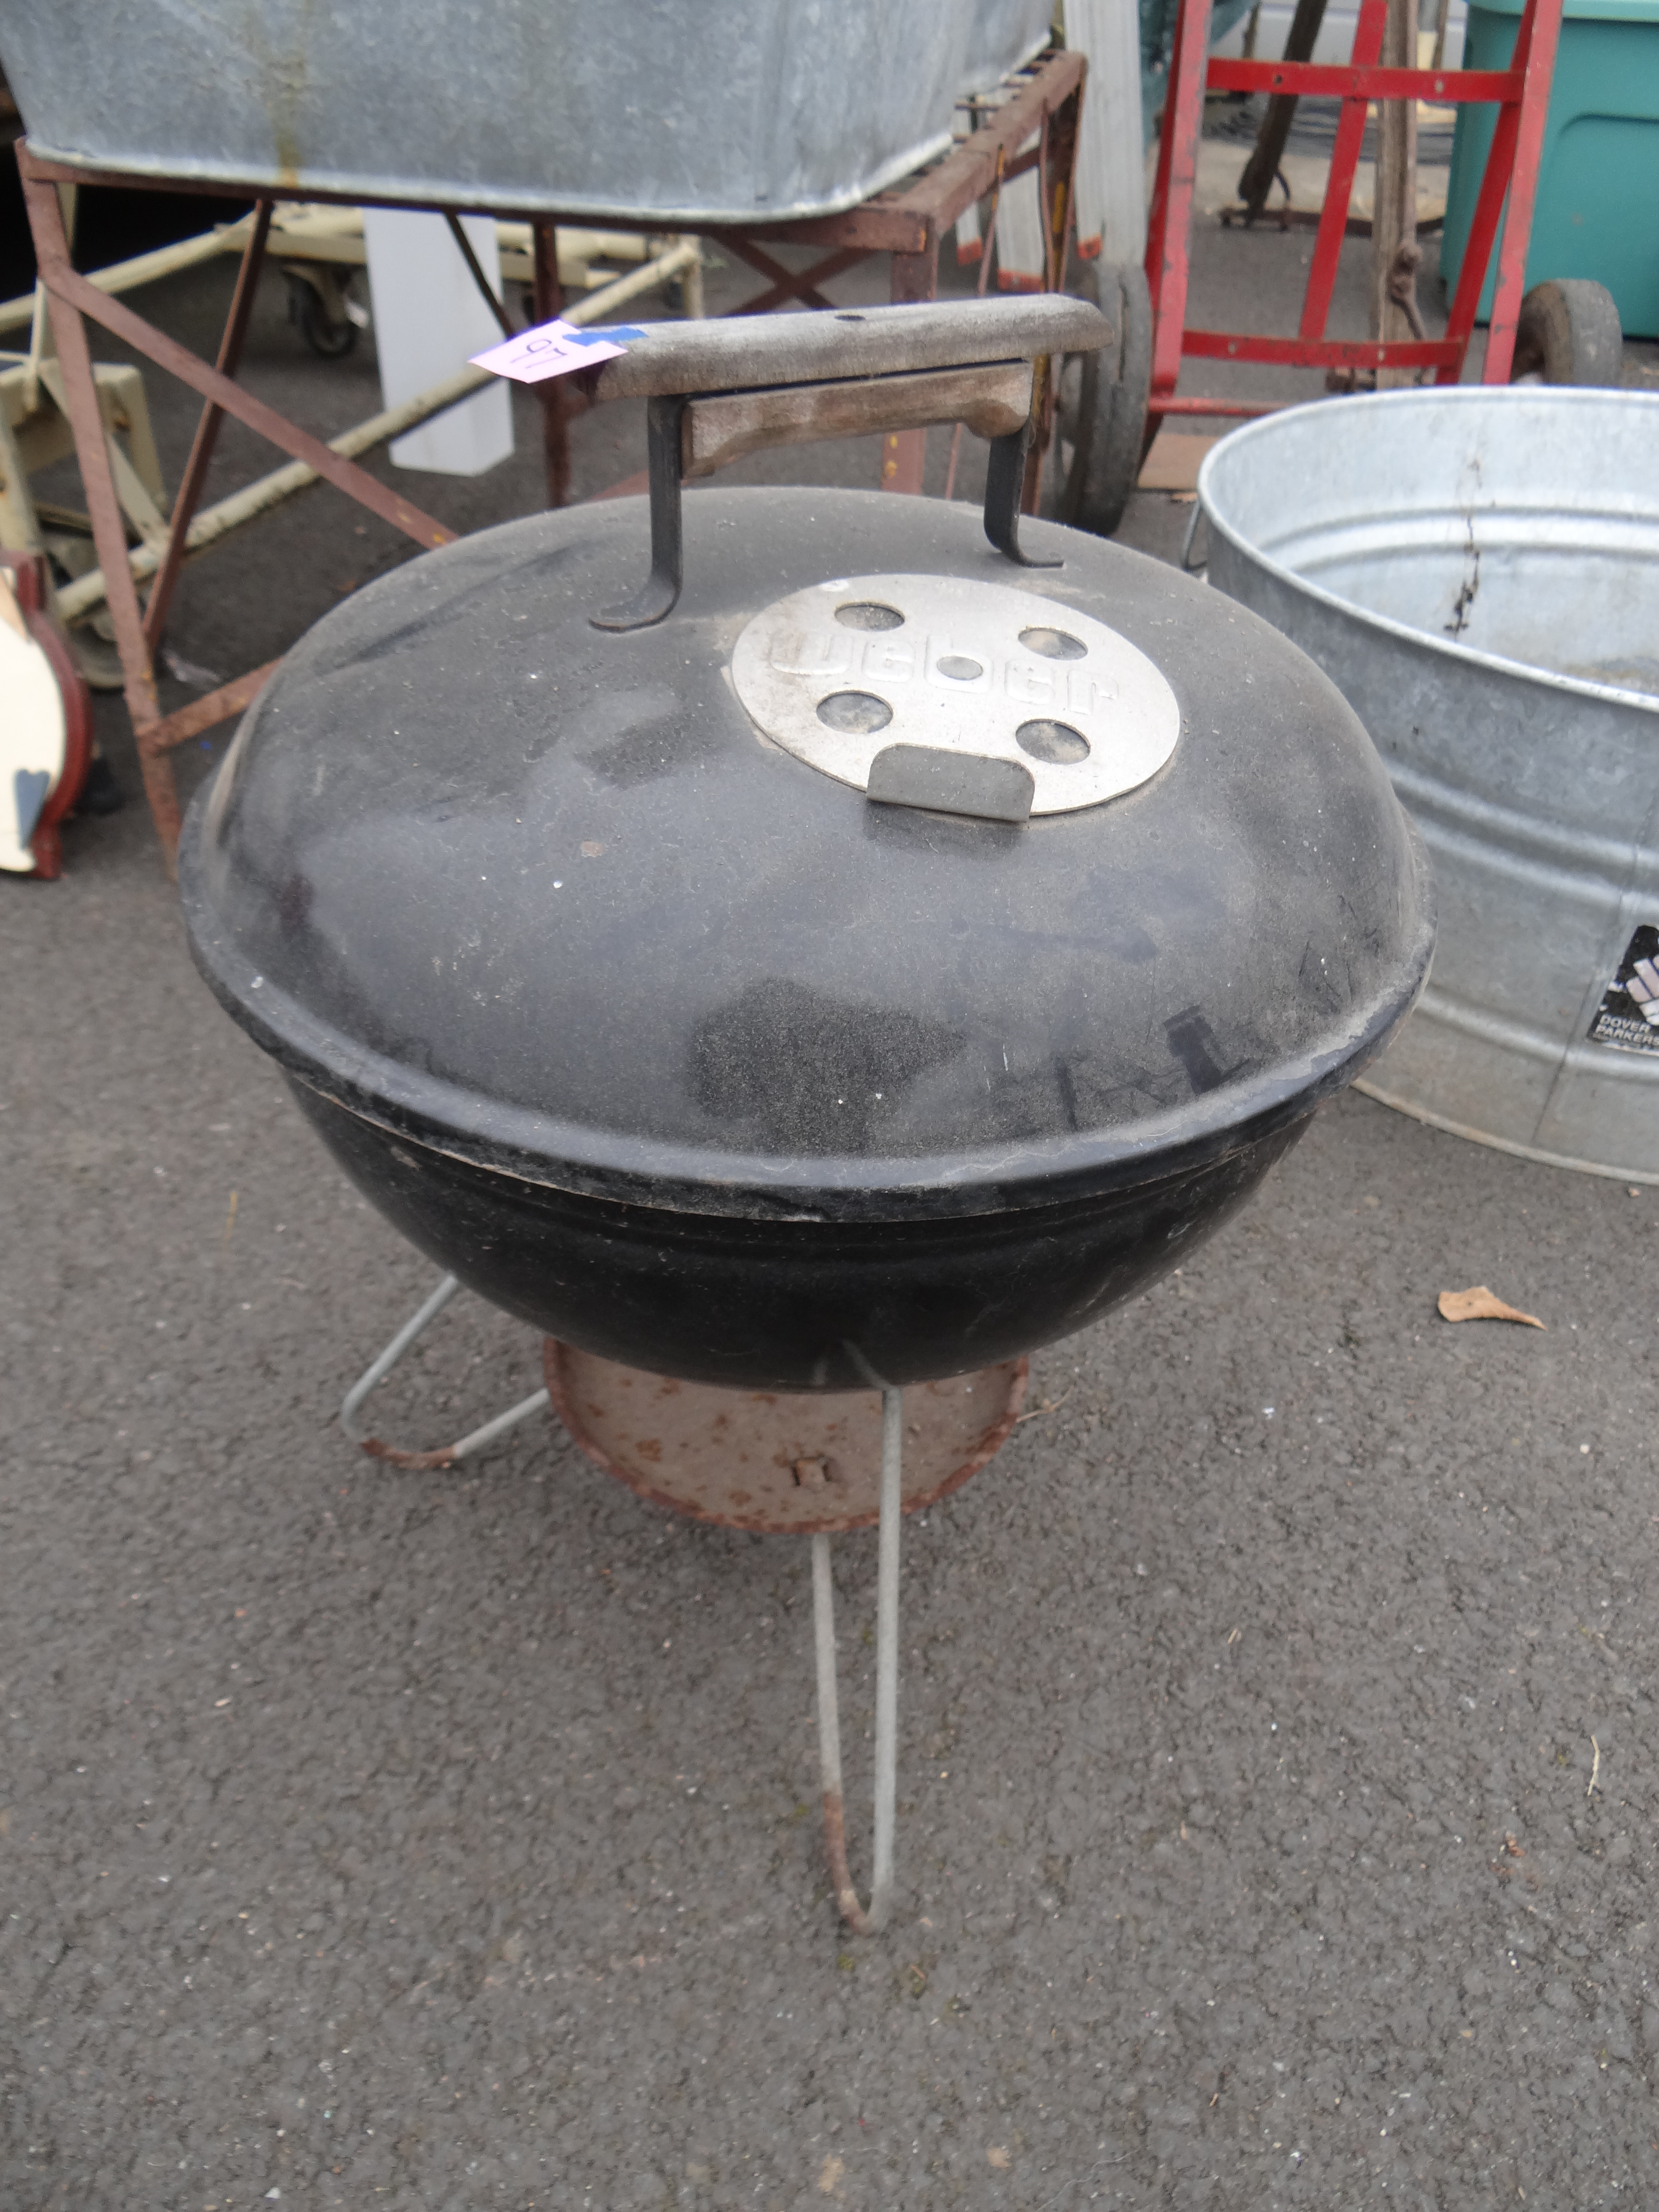 97-Small Charcoal BBQ Grill Ready to Use w/ Charcoal Inside